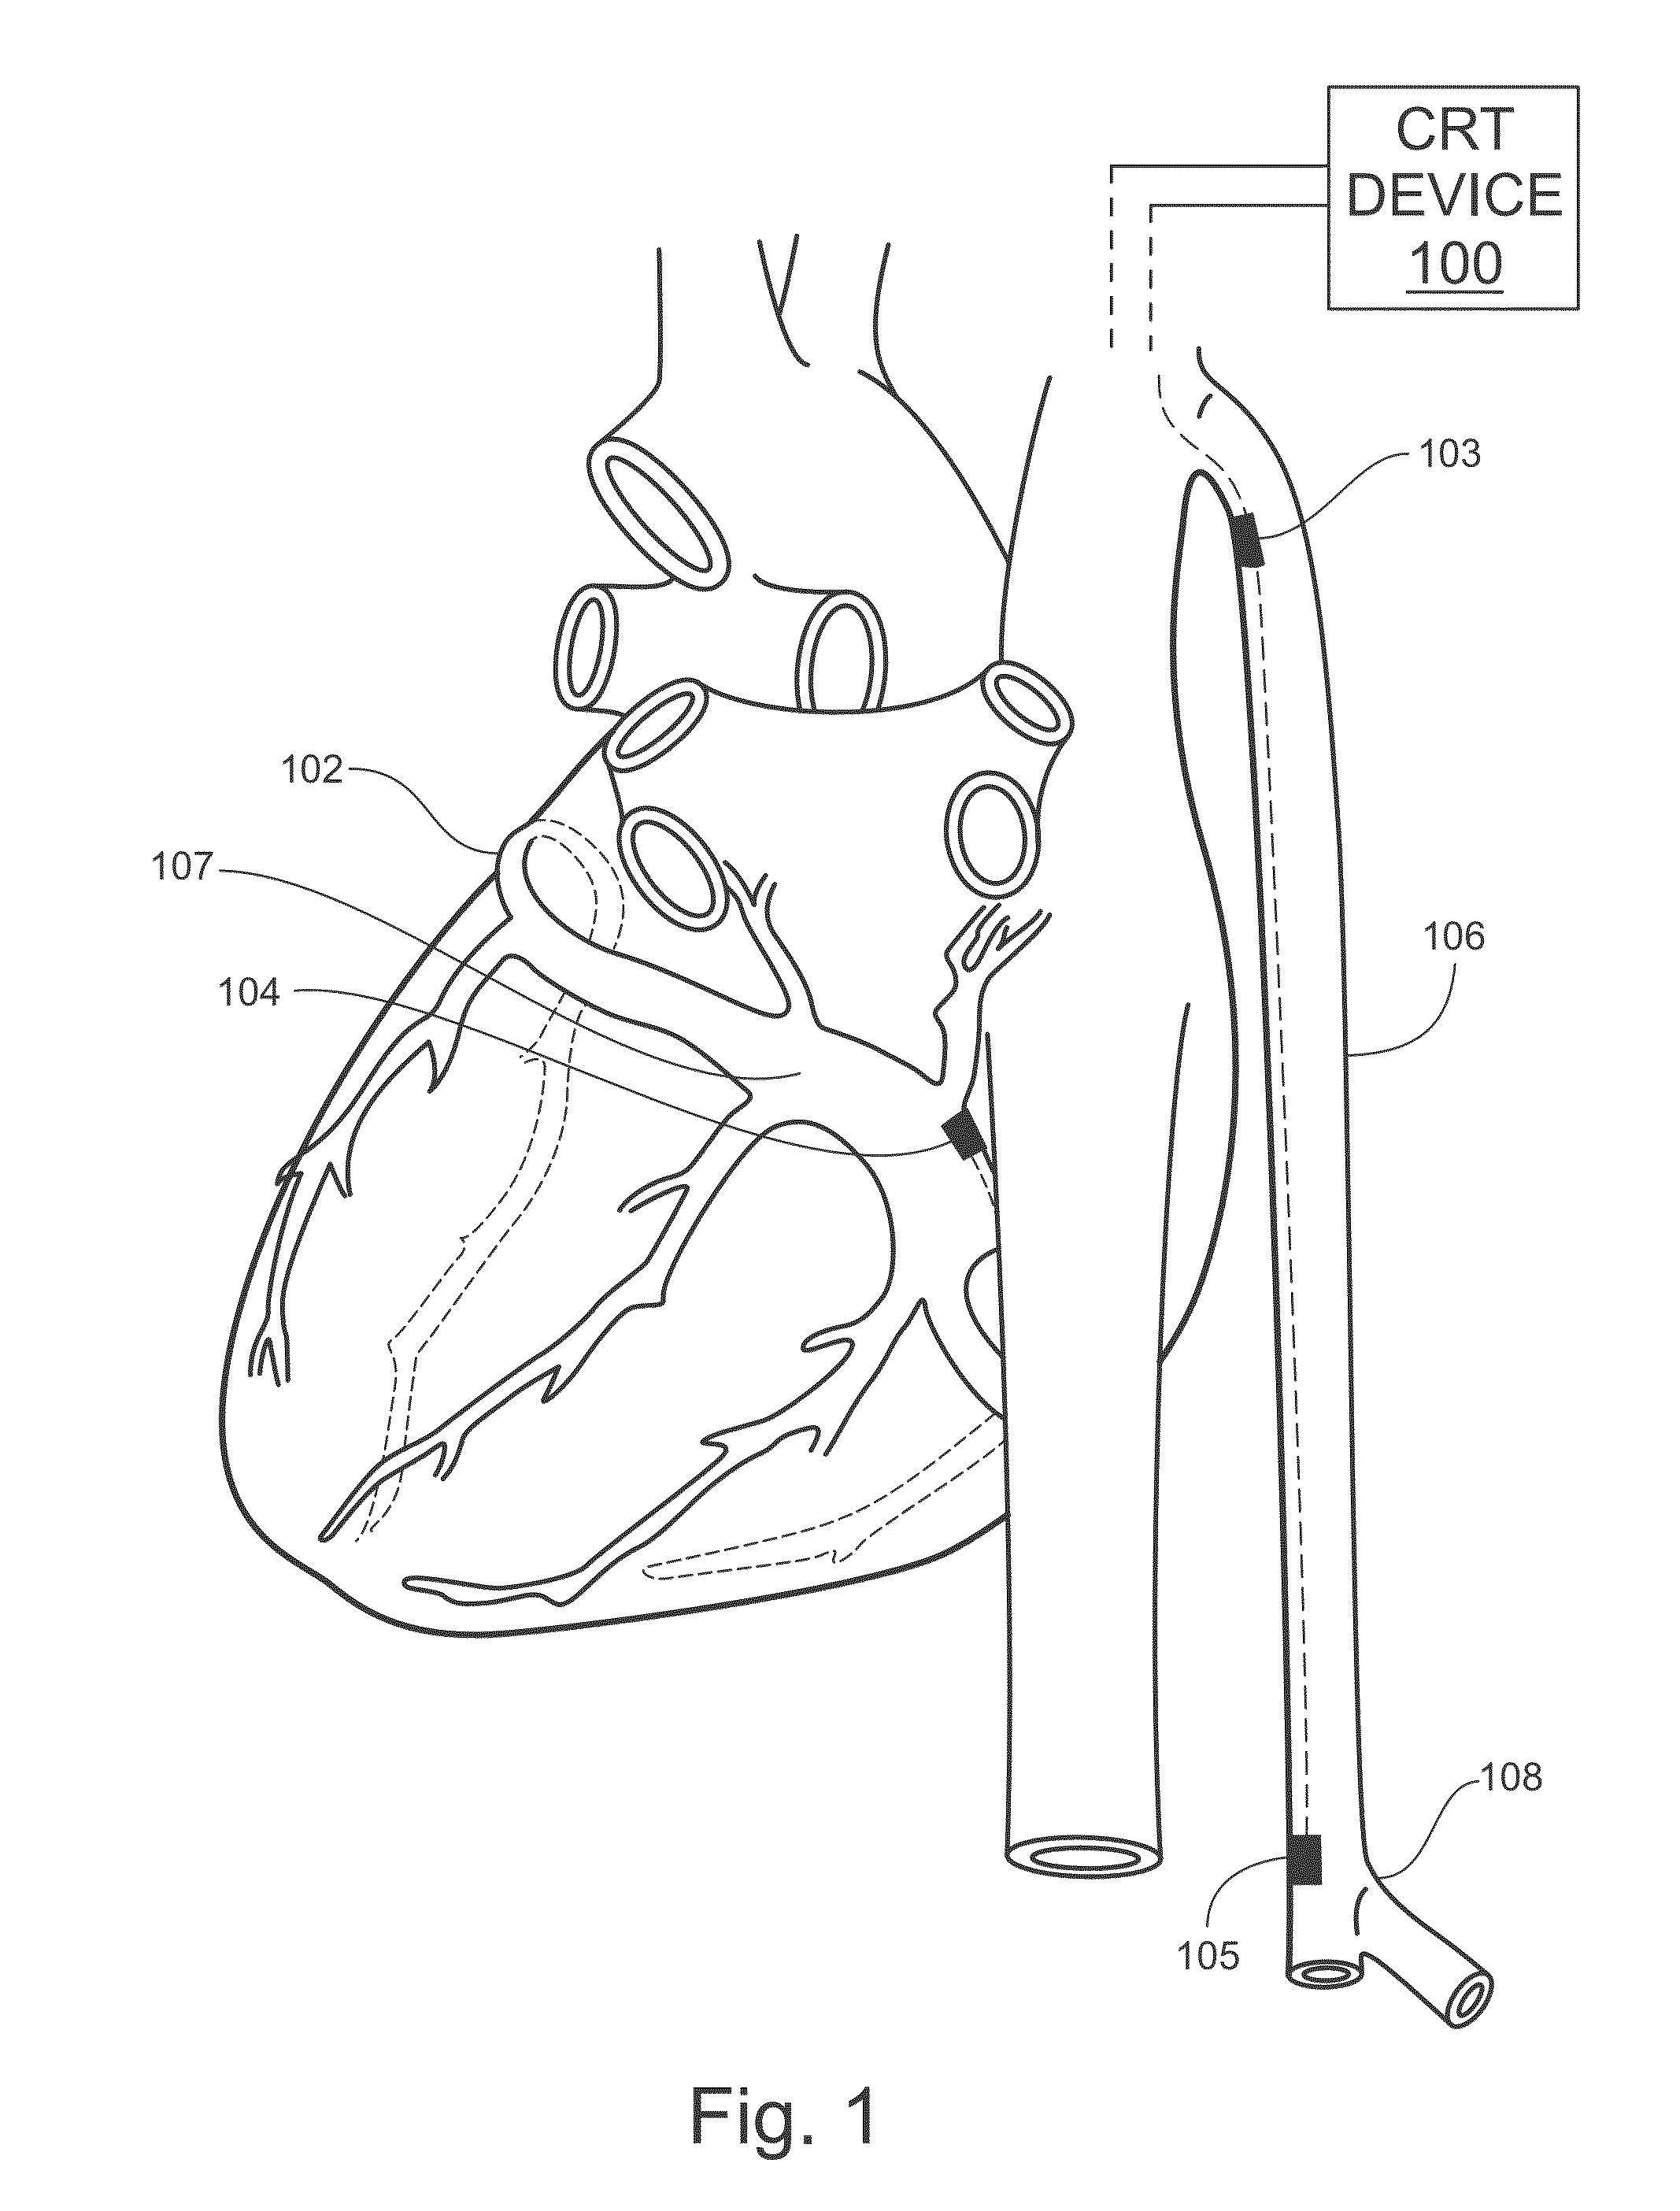 Systems and methods for optimizing cardiac resynchronization therapy (CRT)